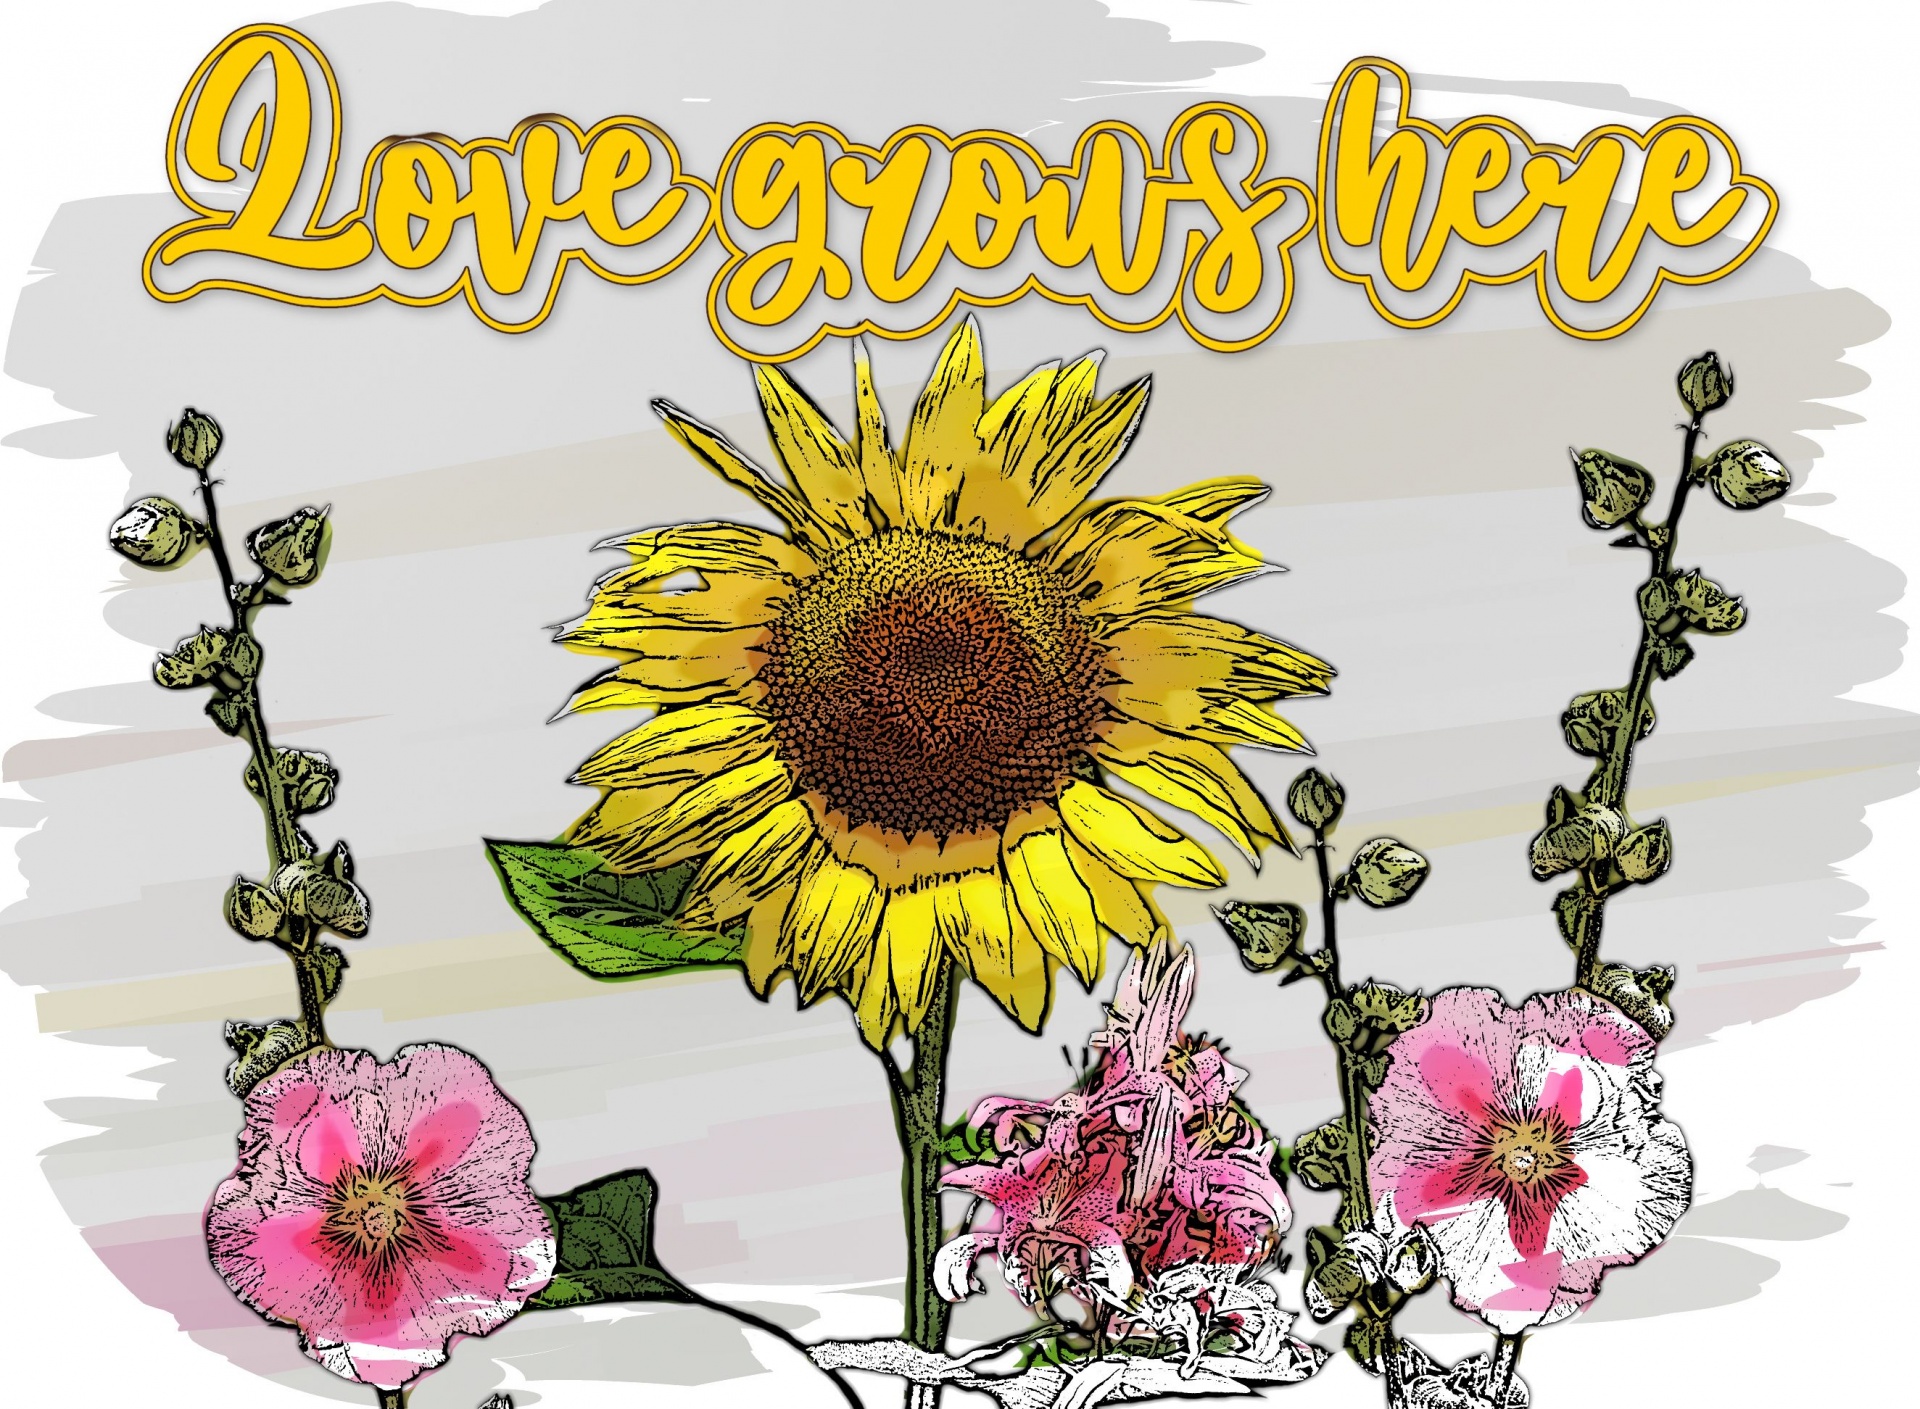 Love Grows Here Sunflower Poster